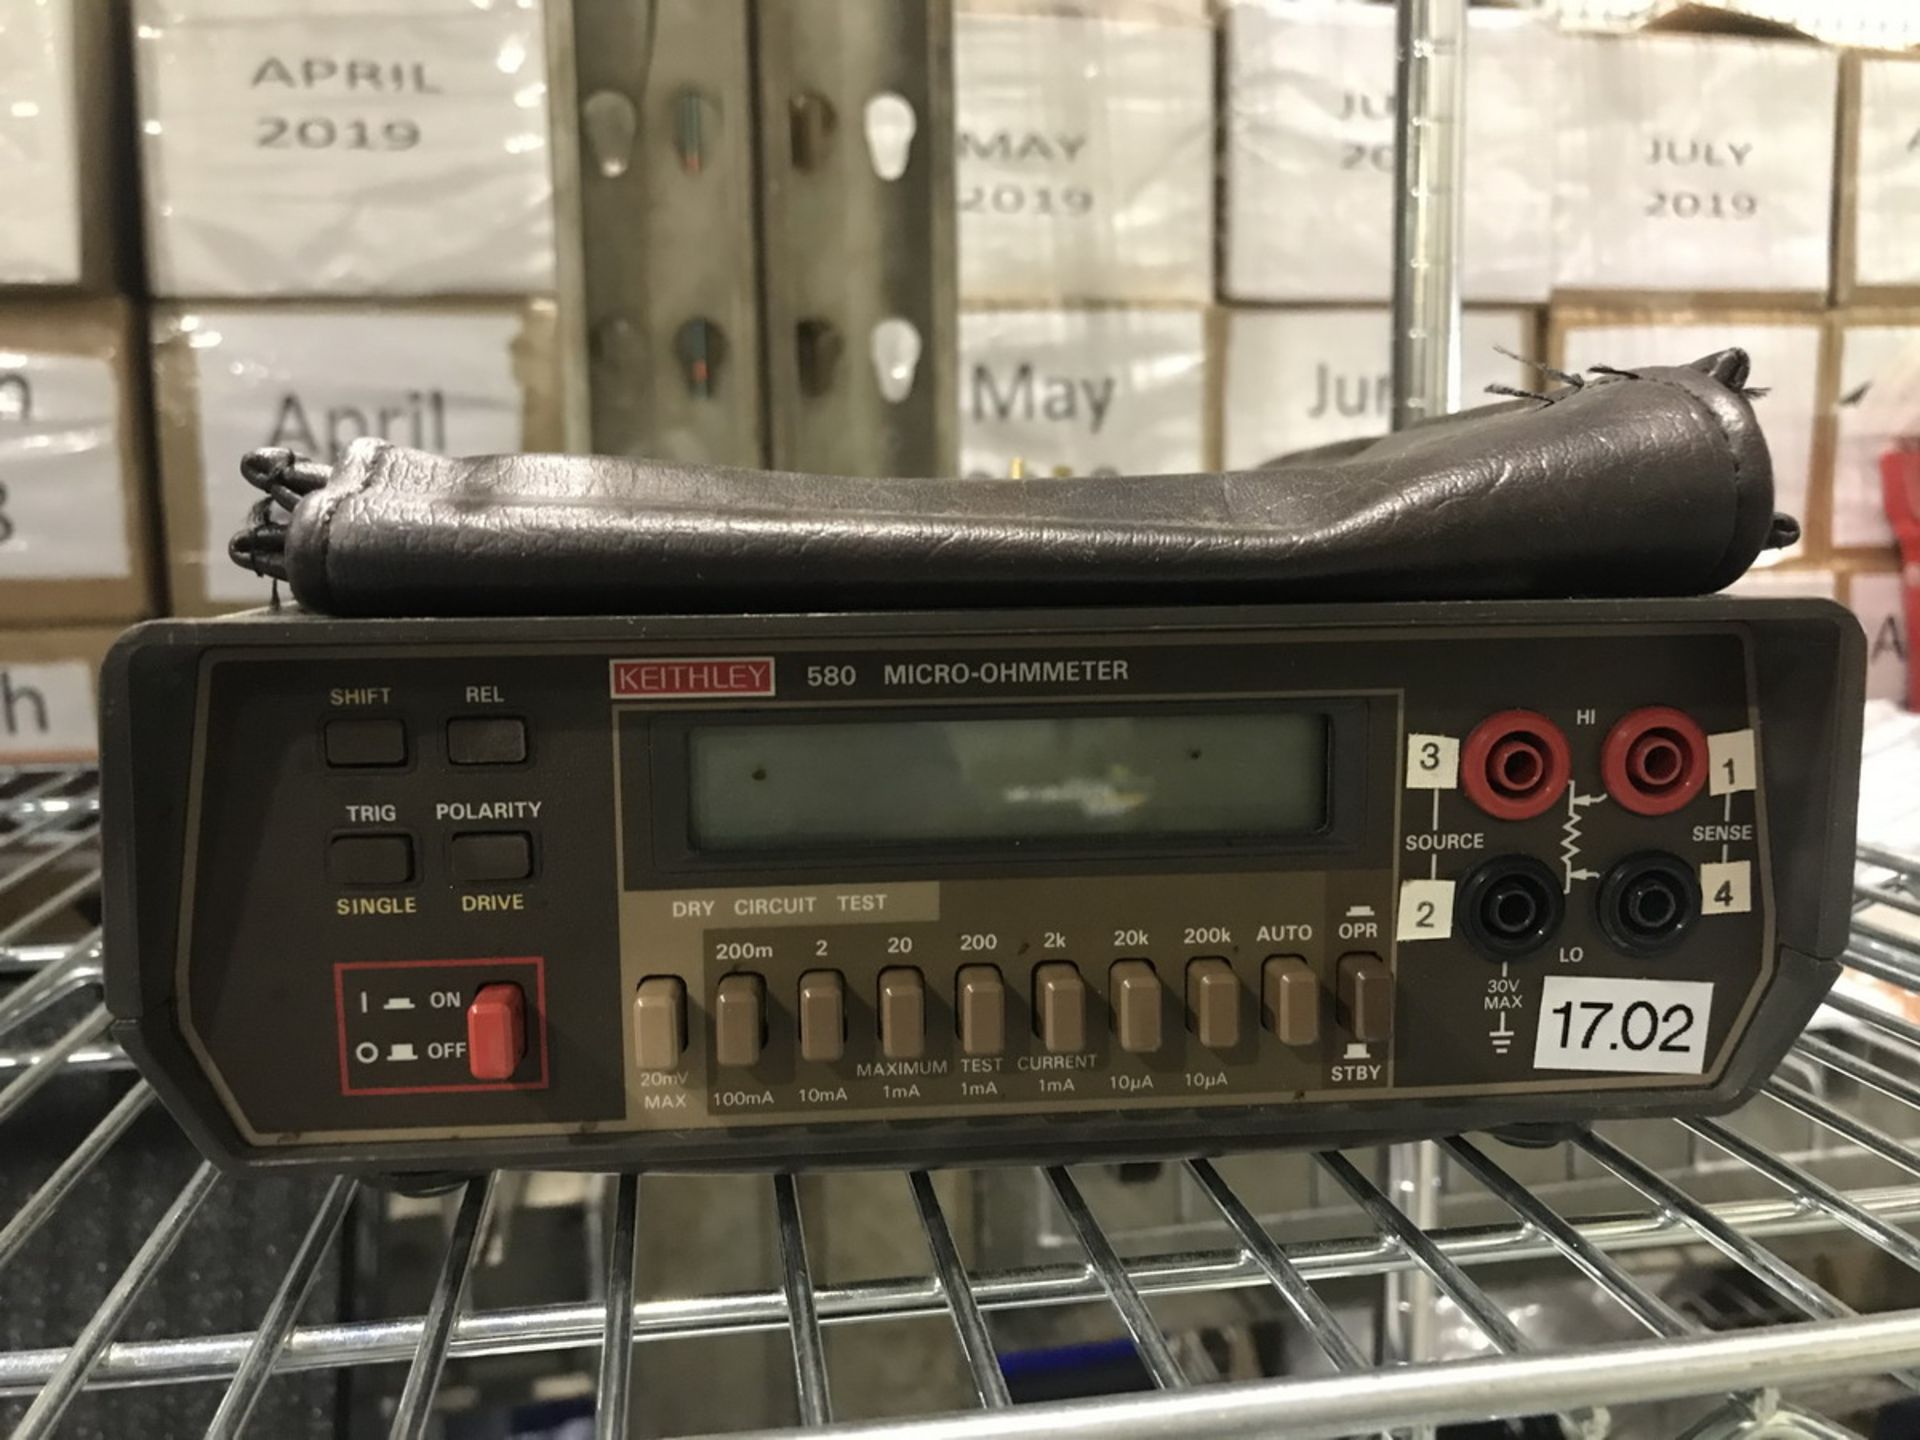 Keithley 580 Micro-Ohmmeter